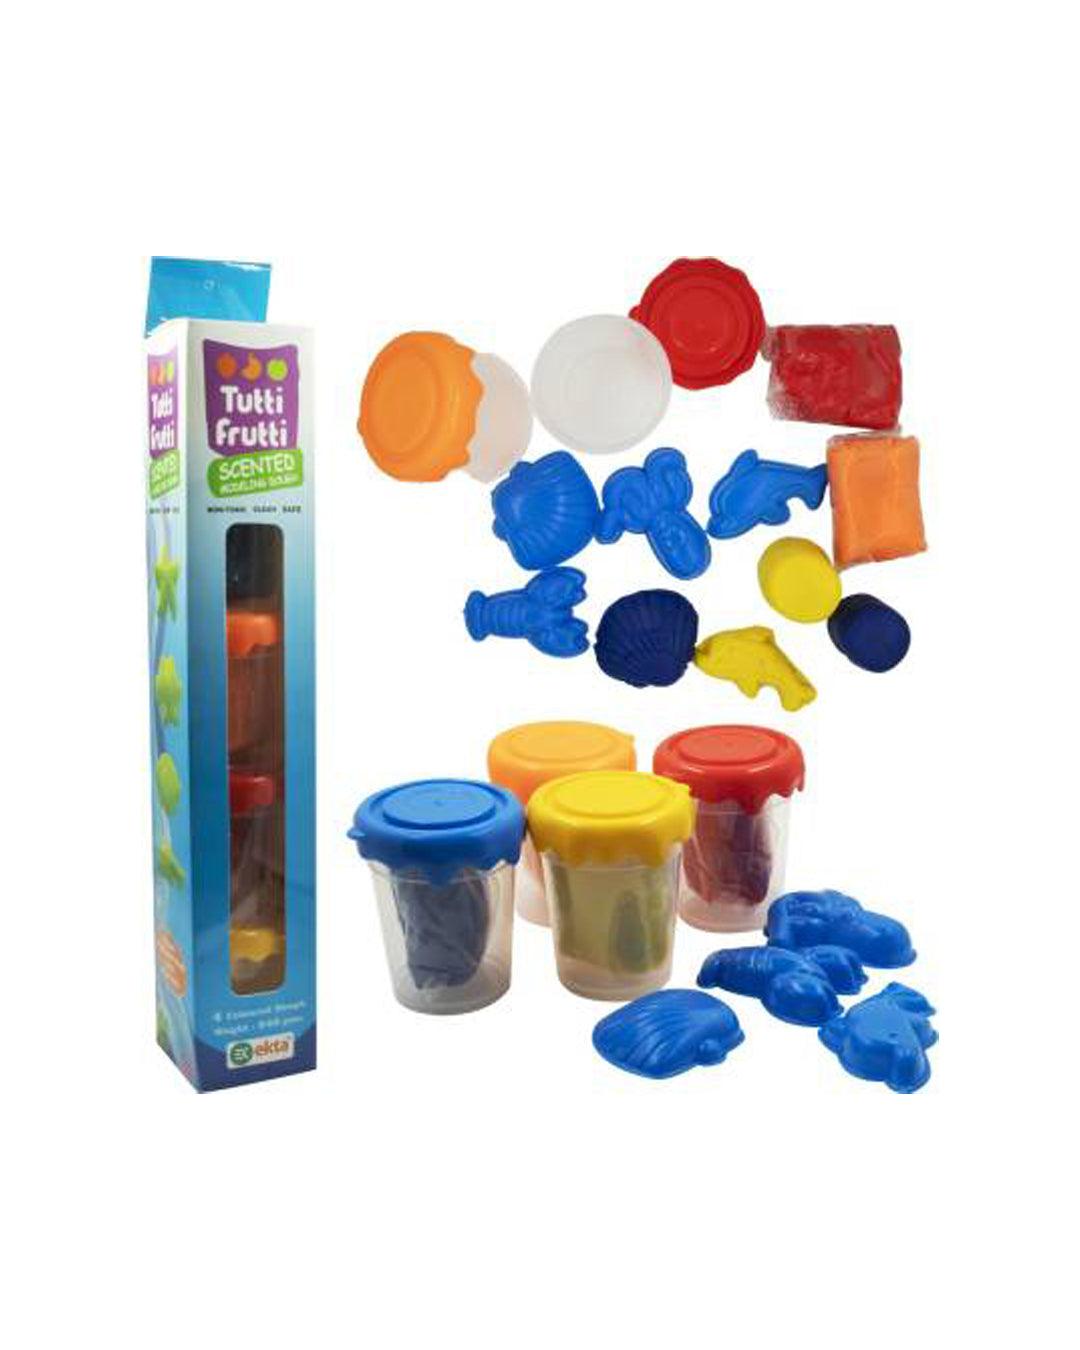 Tutti Frutti Scented Modeling Dough, Non-Toxic, Kit for Kids - Moulding Clay - MARKET 99